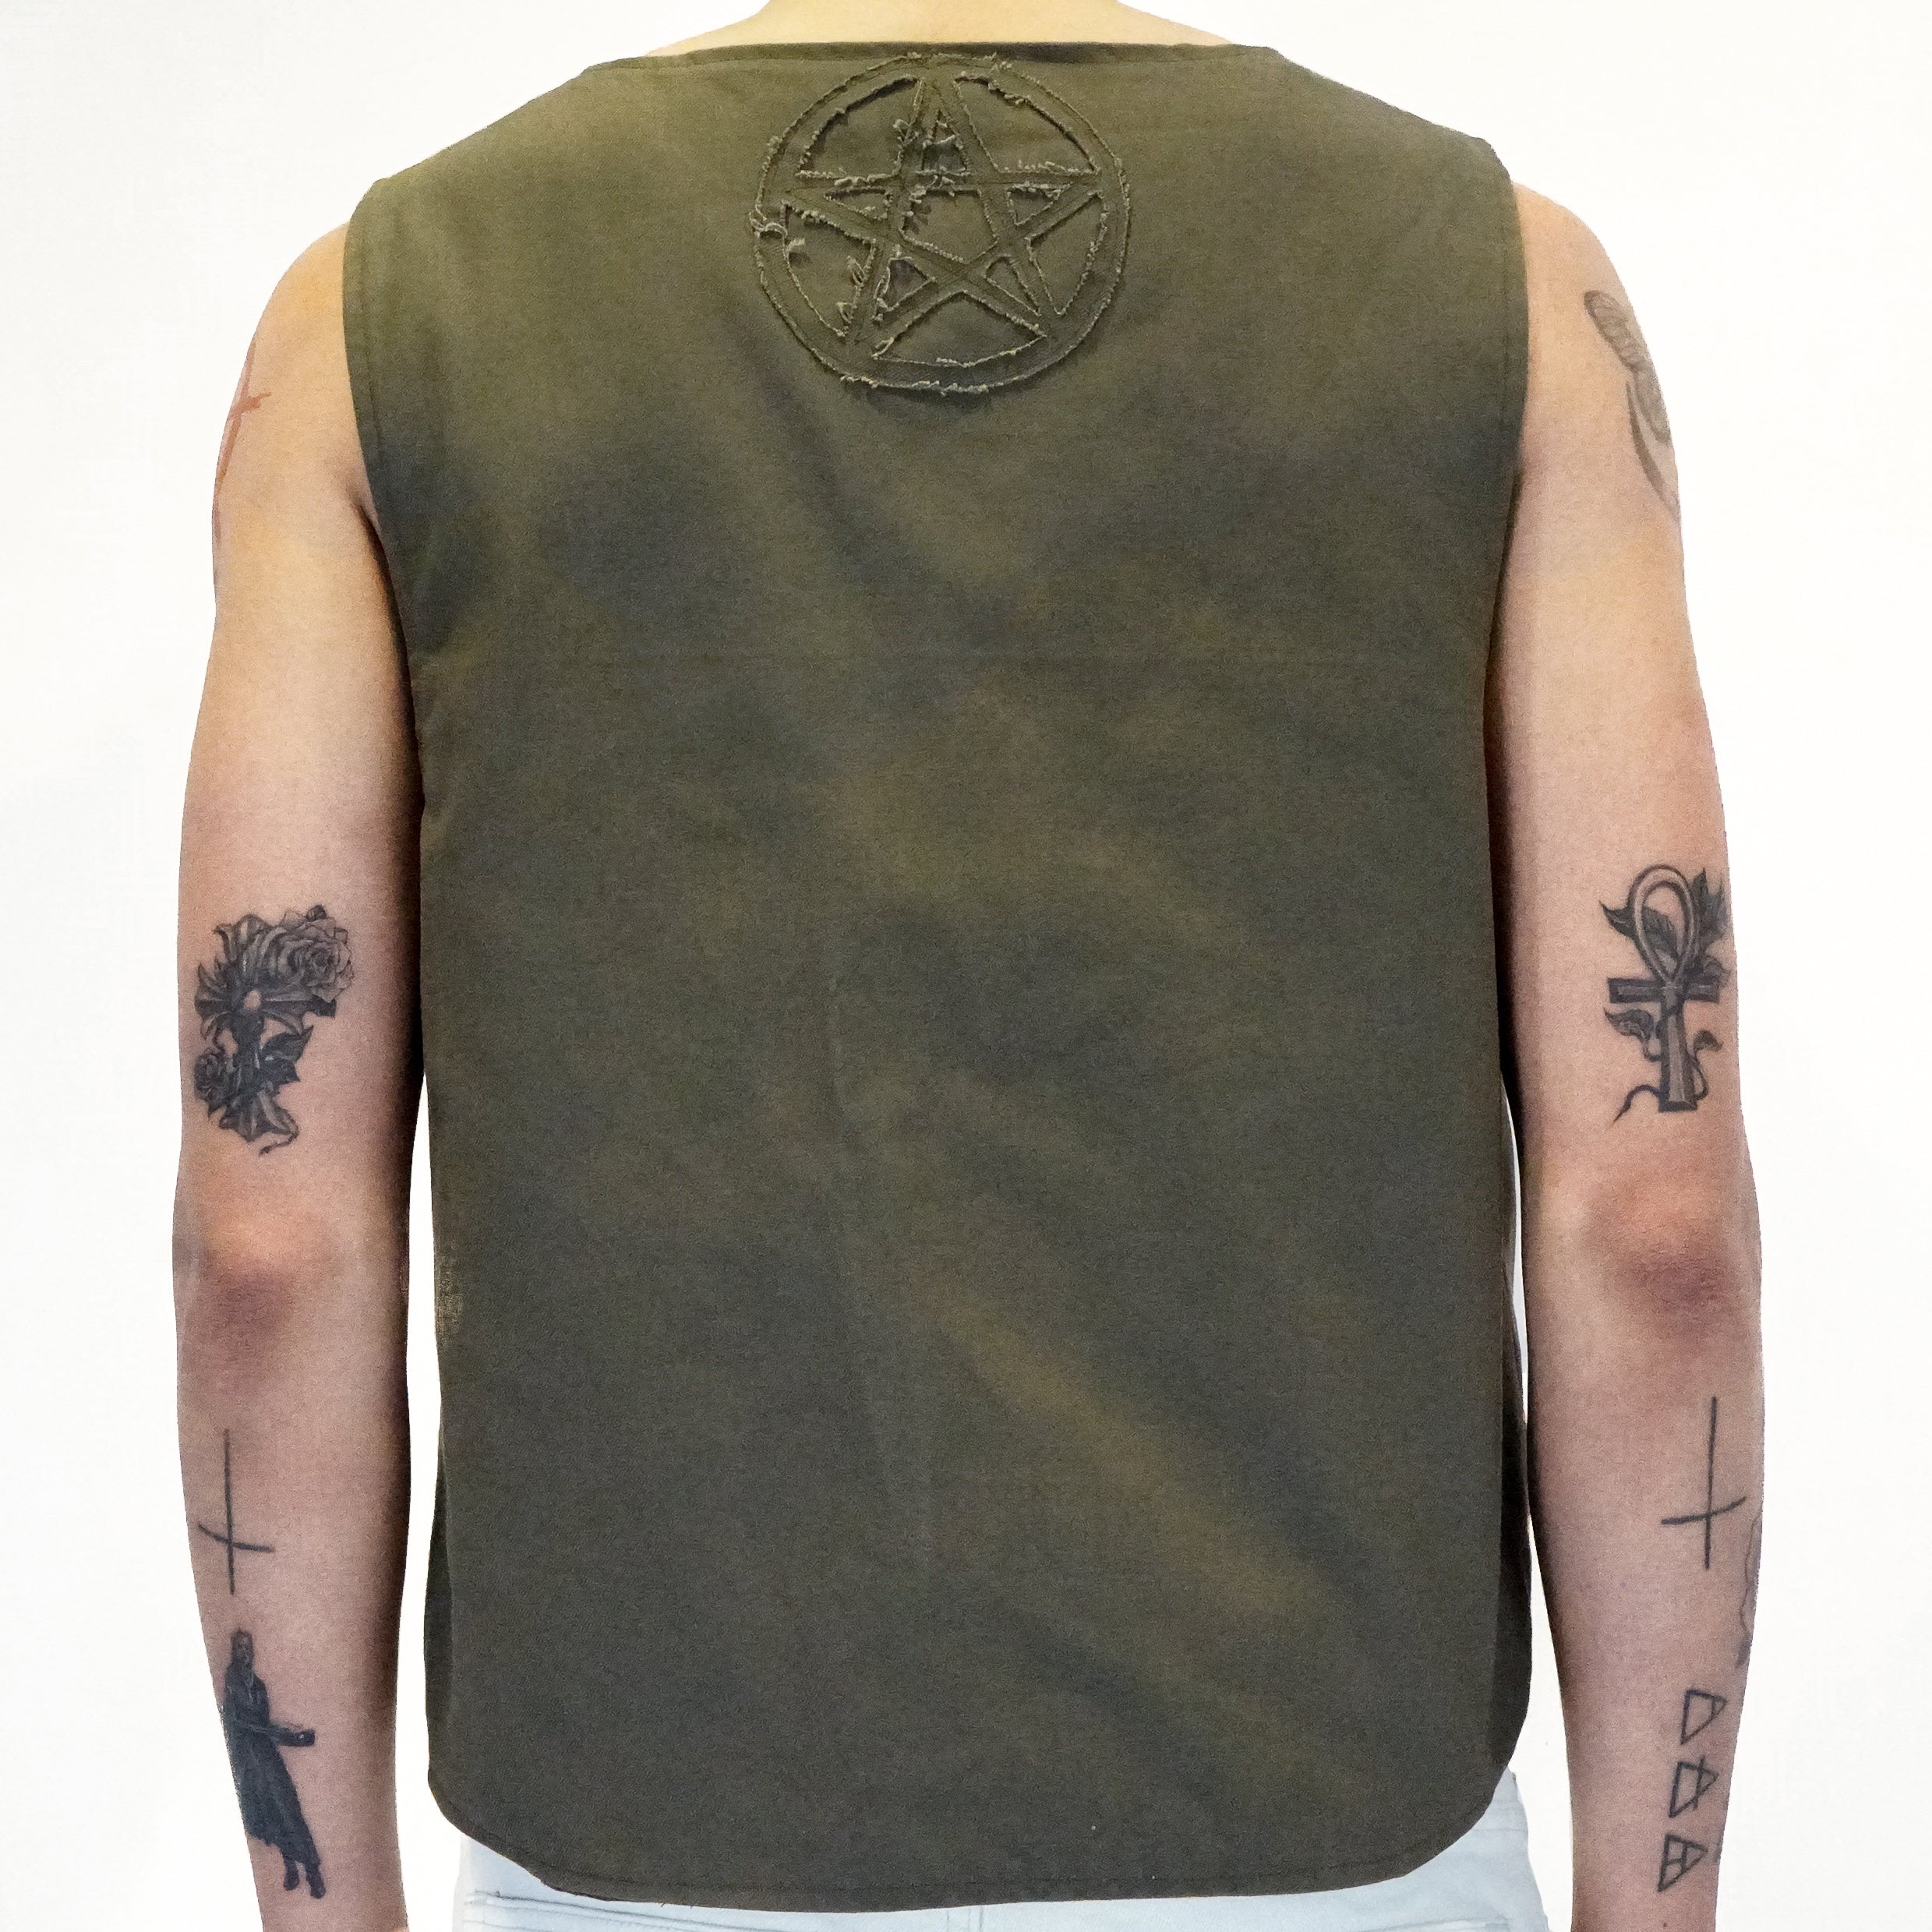 The Pentacle Vest (Reversible) in Brown/Olive